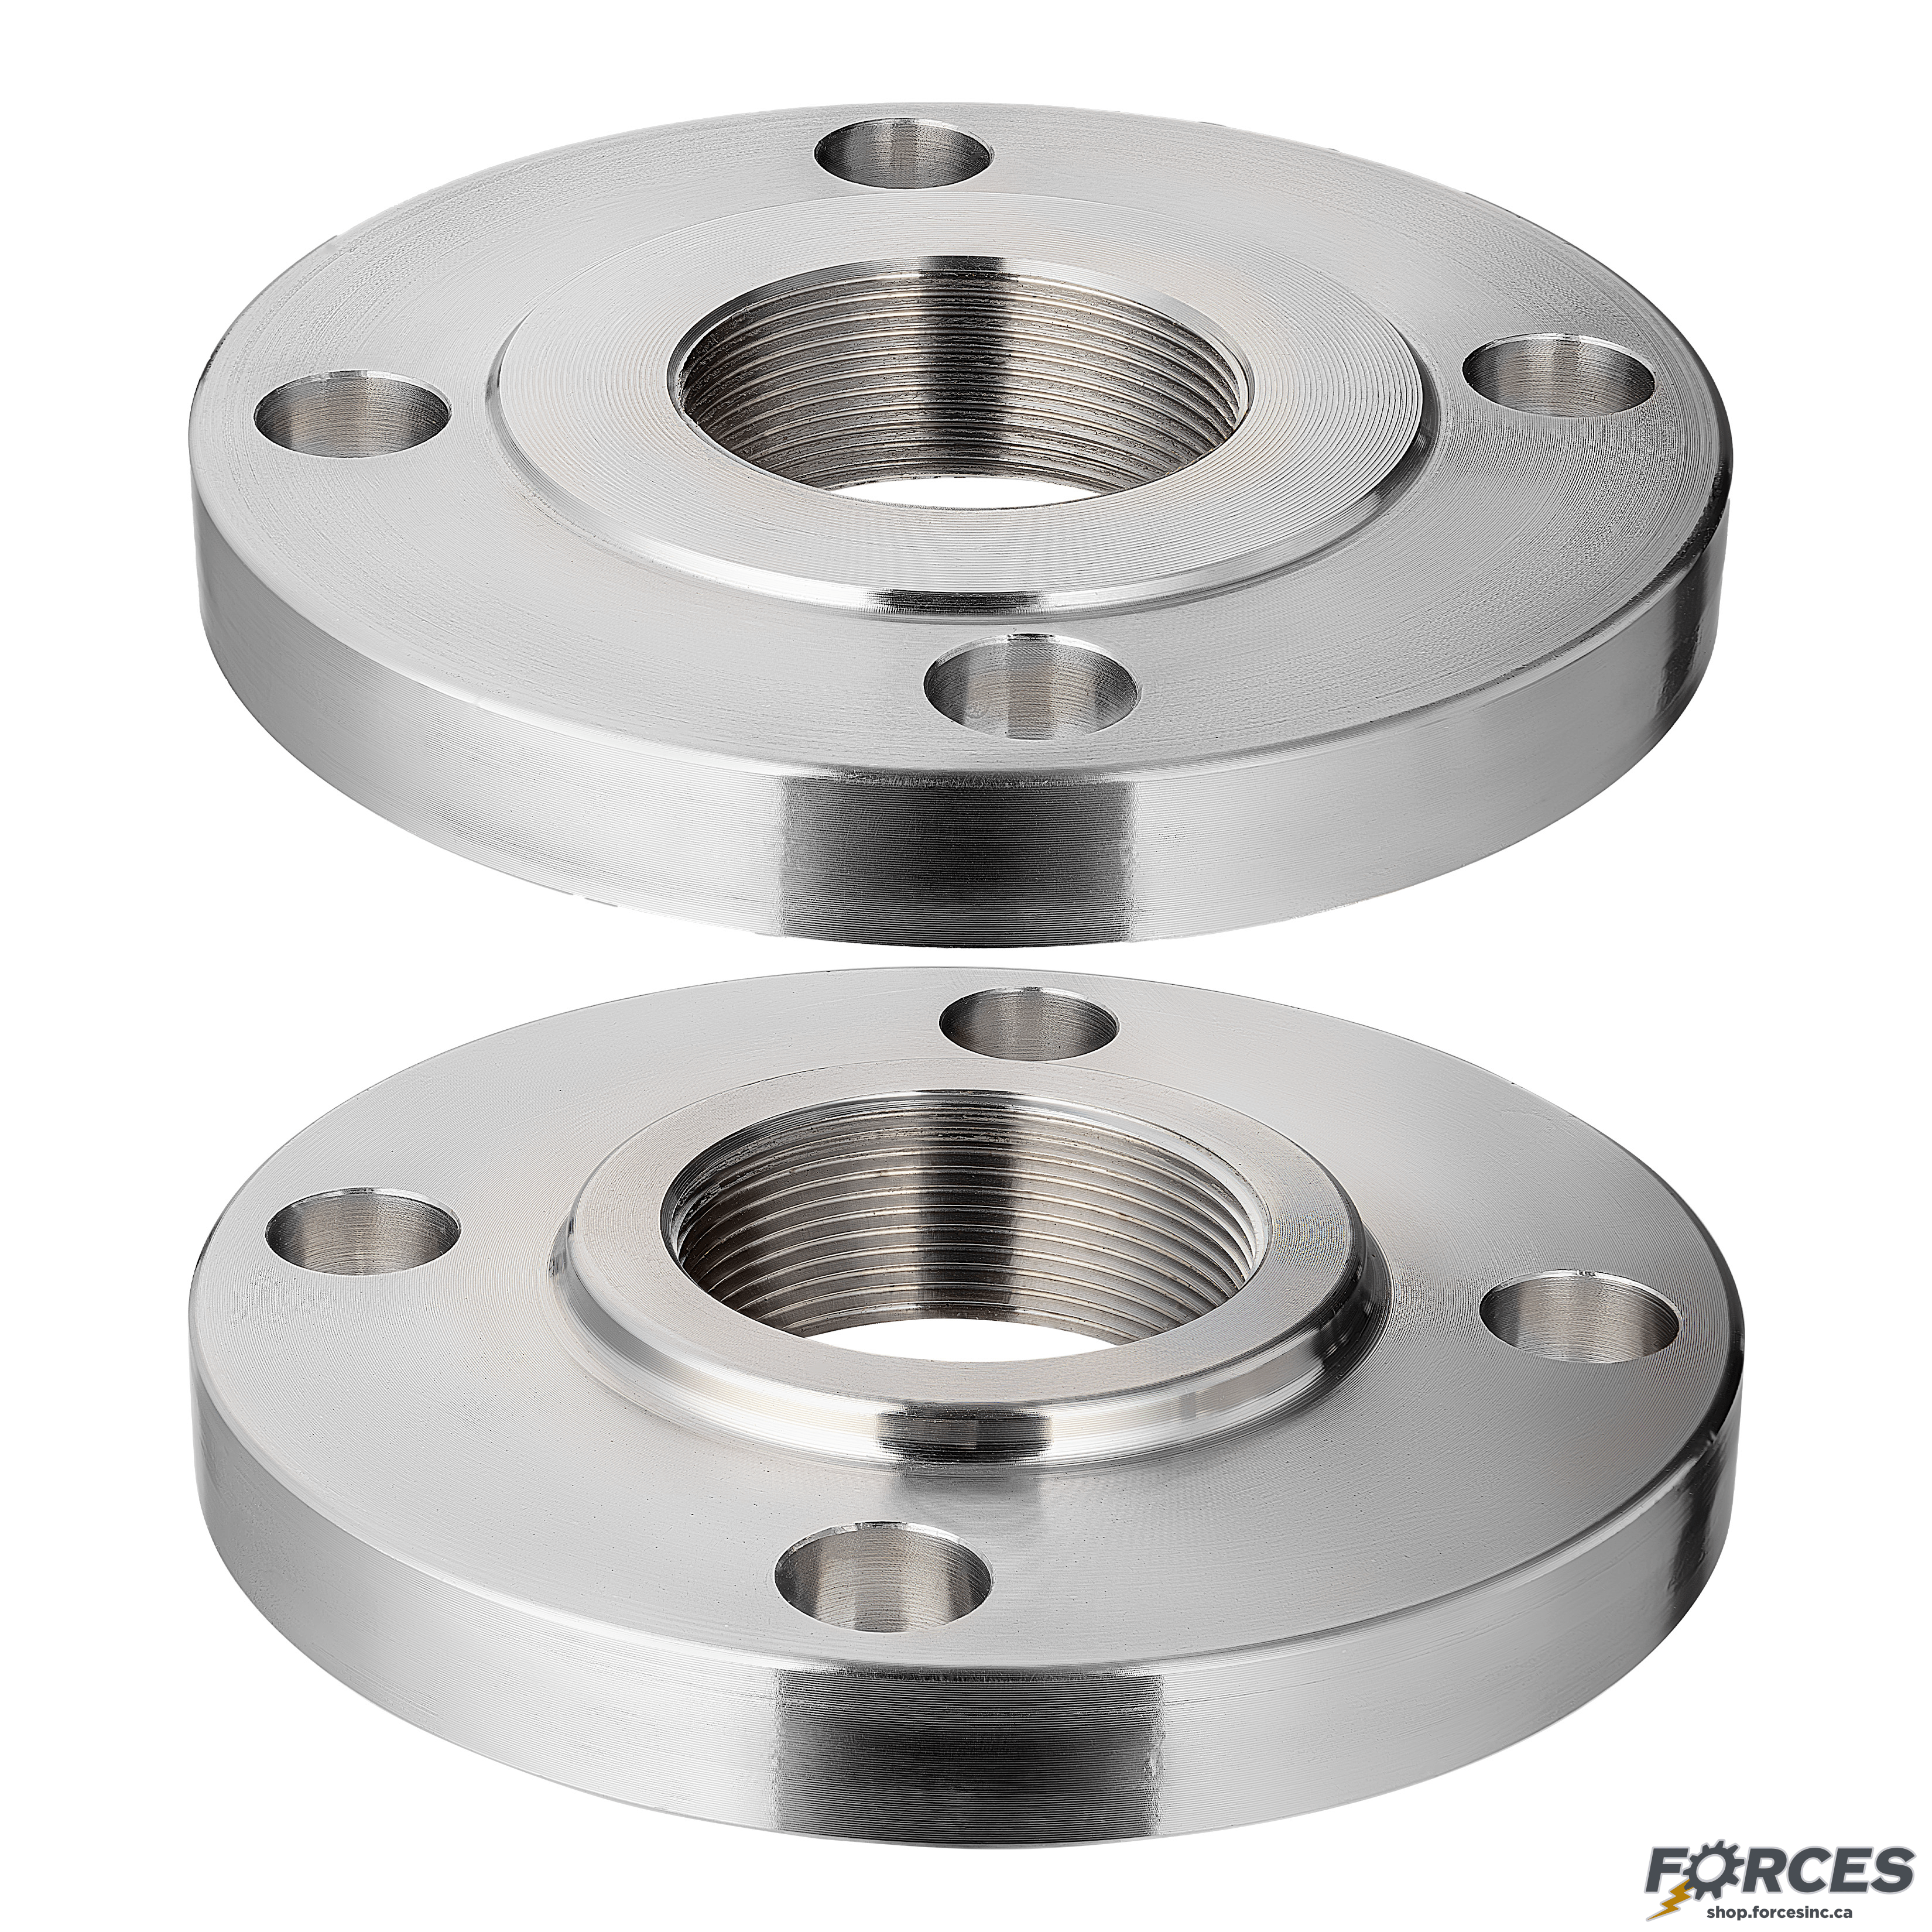 2" Threaded Flange NPT Class #150 - Stainless Steel 316 - Forces Inc